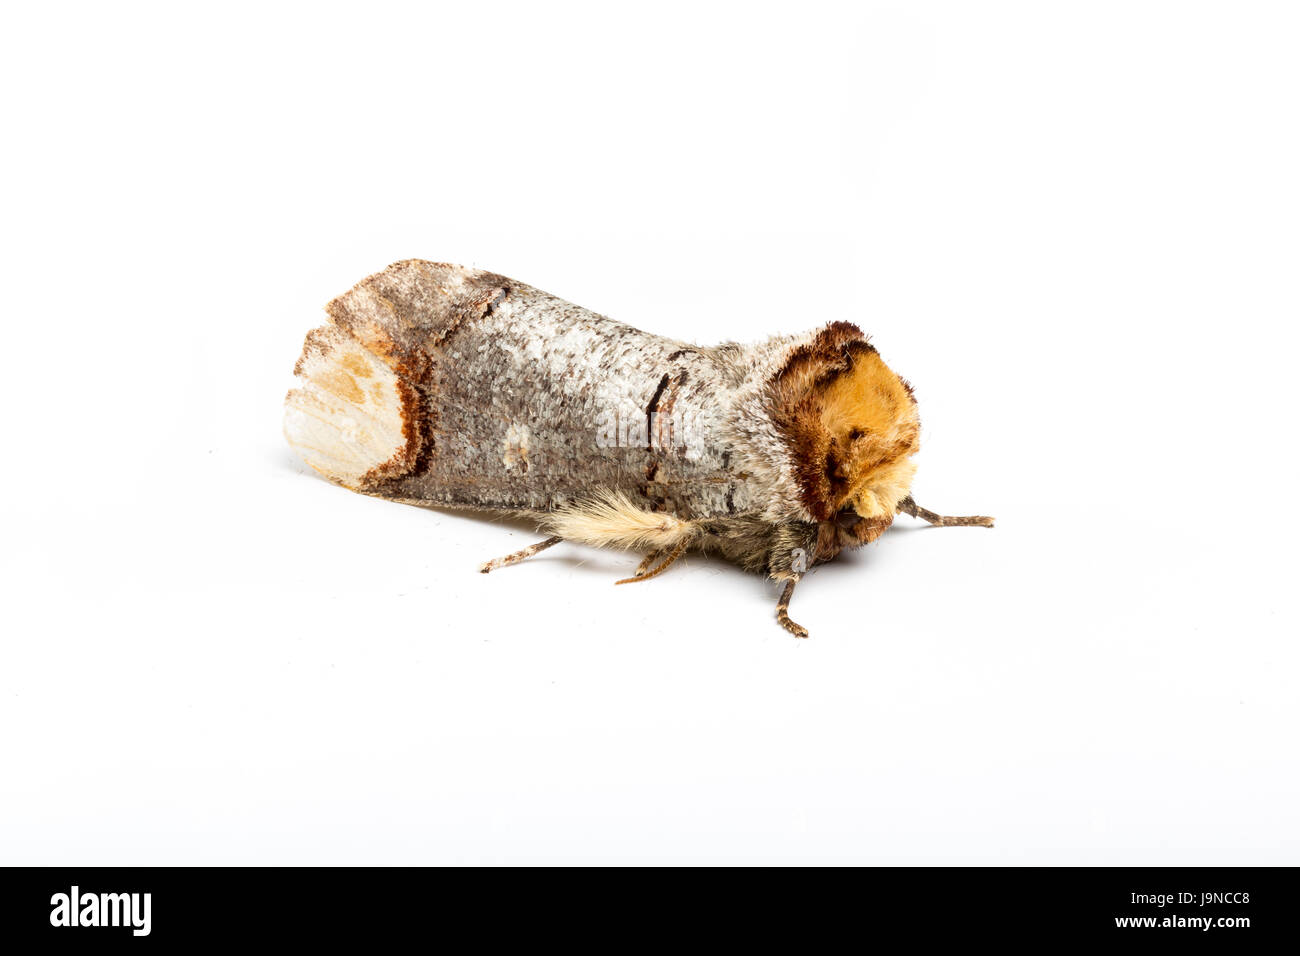 Buff-tip moth, Phalera bucephala, on white background. Catbrook, Monmouthshire, May.  Family Notodontidae. Mimics a broken twig to escape notice. Stock Photo